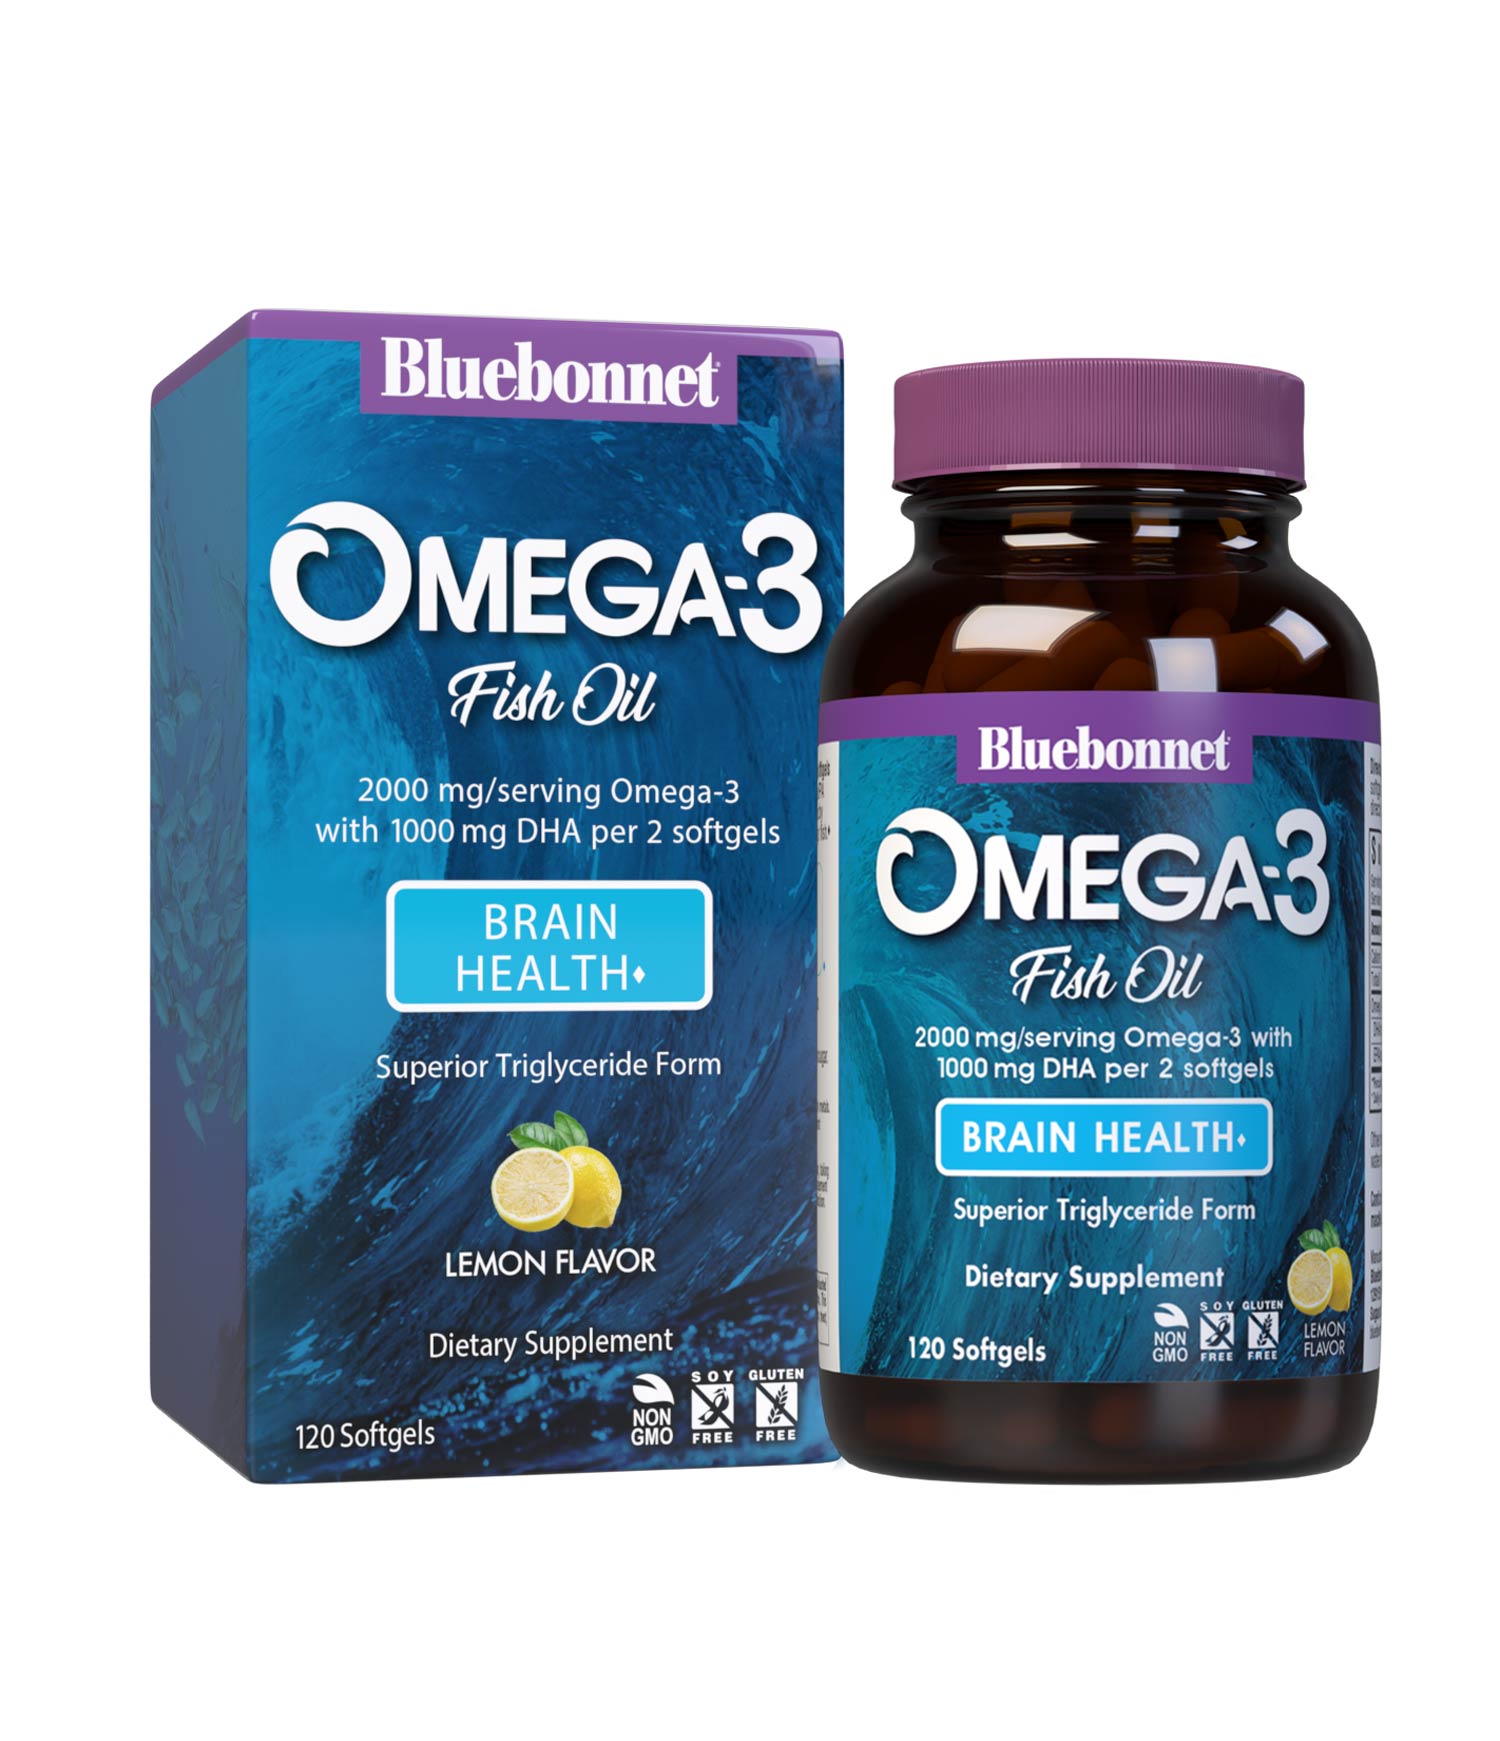 Bluebonnet’s Omega-3 Fish Oil Brain Health 120 Softgels are formulated with a specific ratio of DHA and EPA to help support brain function, mood, and focus by utilizing ultra-refined omega-3s from wild-caught fish. With box. #size_120 count